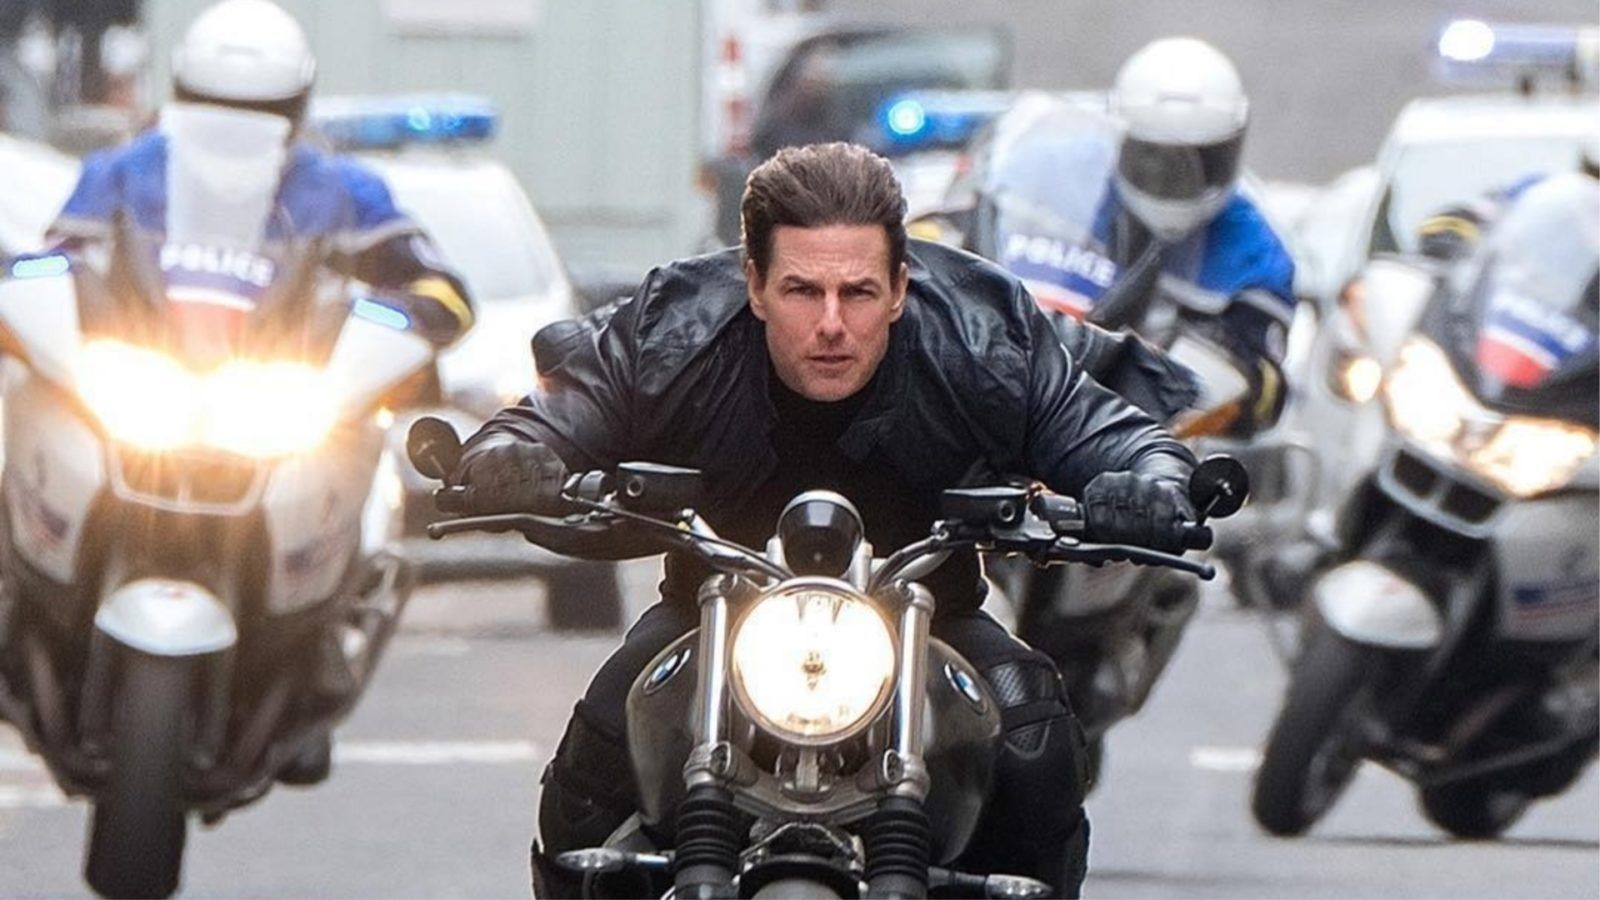 ‘Mission: Impossible 7 Part 1’ trailer is finally here as Tom Cruise returns with action-packed scenes